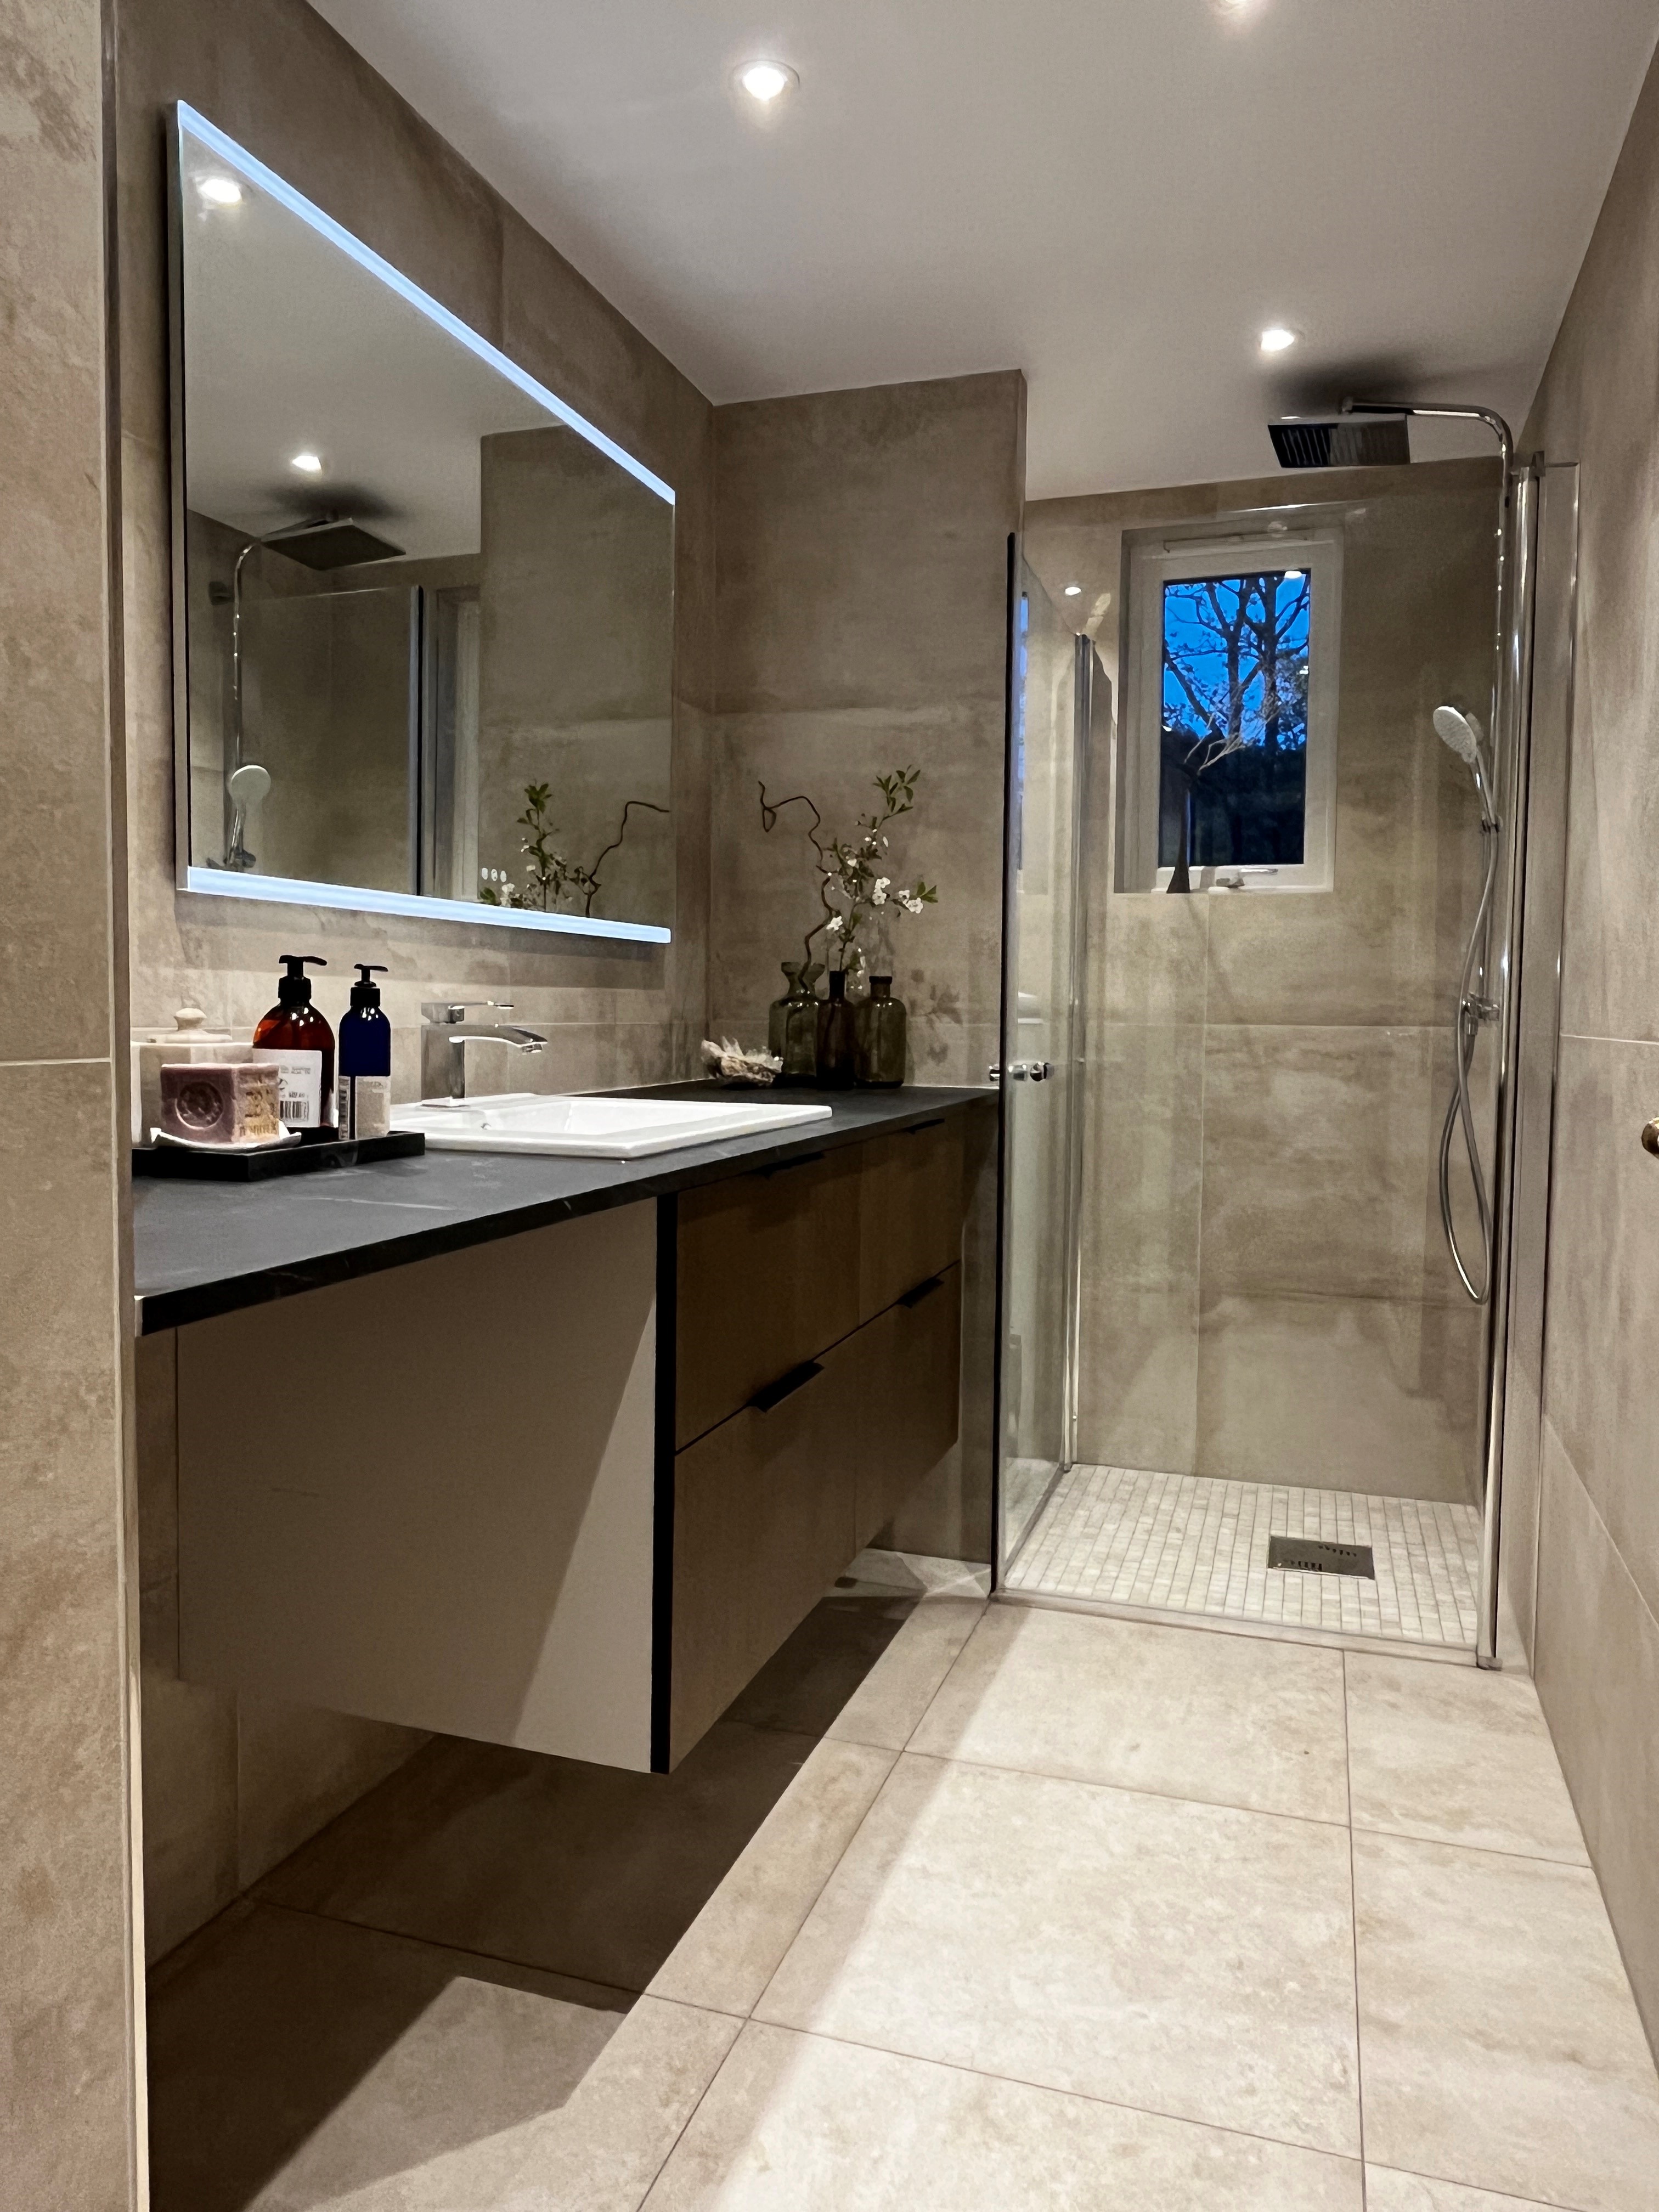 Modern bathroom with light gray tiled walls and floor, an illuminated mirror, a white sink with a chrome faucet on a dark countertop, and a floating vanity with drawers. The room features a glass-walled shower area and various bathroom accessories on the countertop. A small window is visible in the shower area.